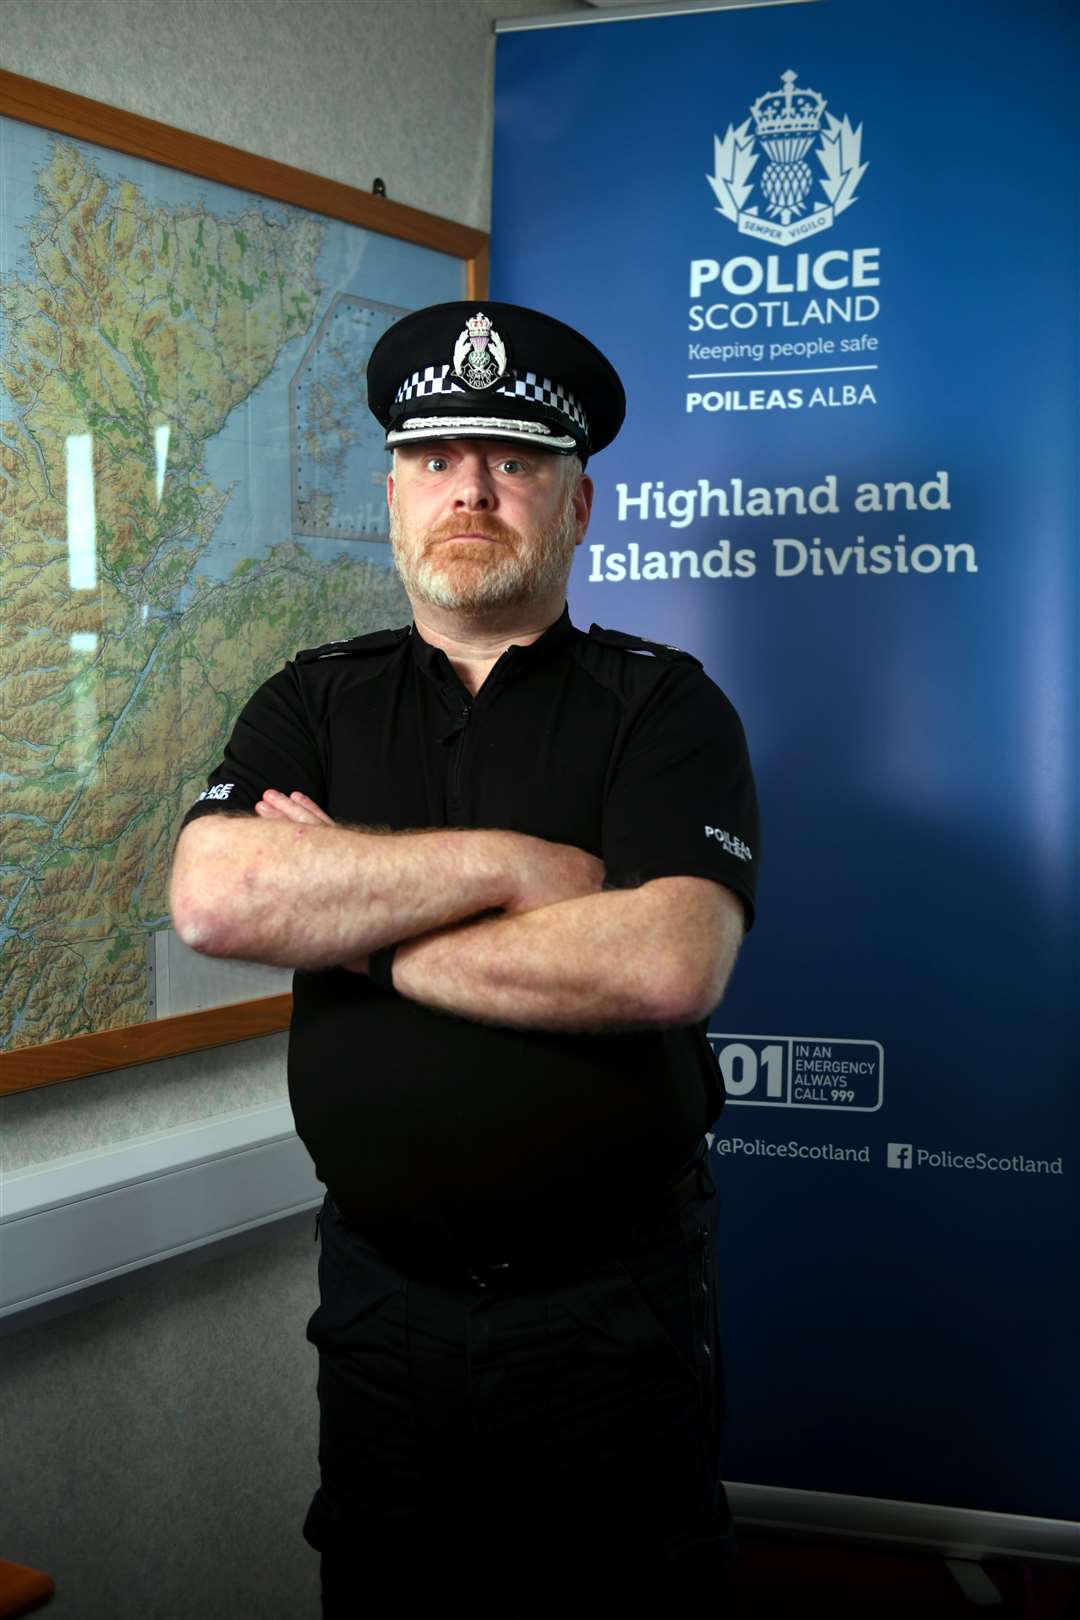 Rob Shepherd, Police Scotland's Chief Superintendent for the Highland and Islands Division. Picture: James Mackenzie